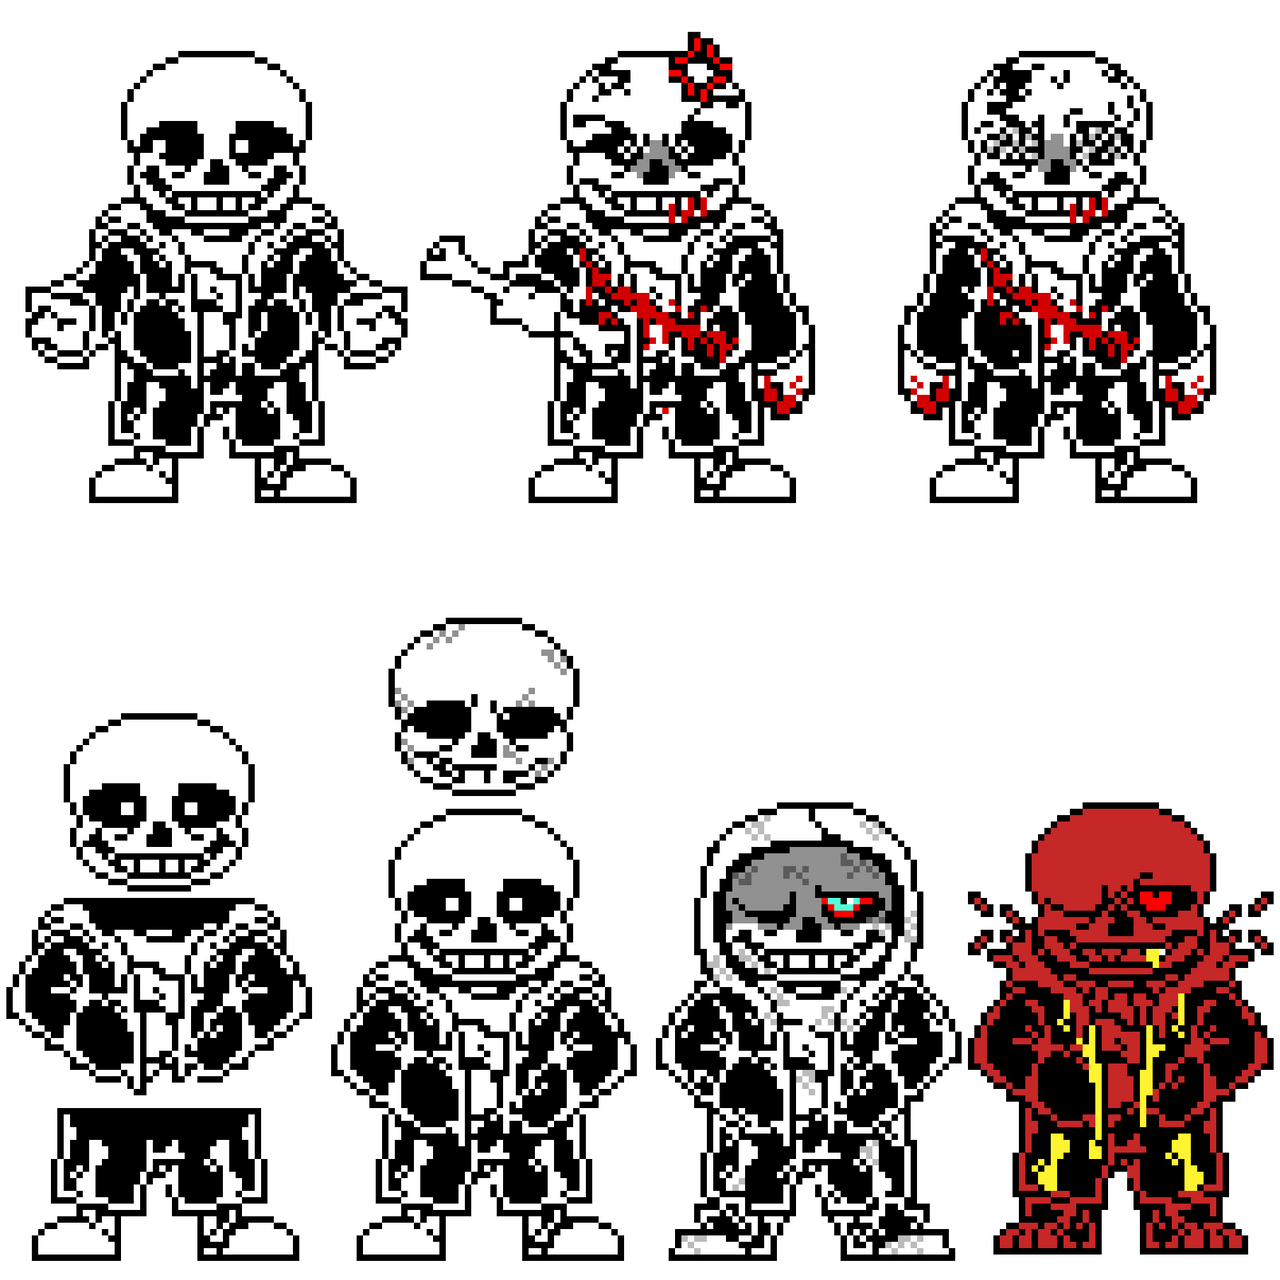 New Sans sprite that is small this time by k0ys0y on DeviantArt